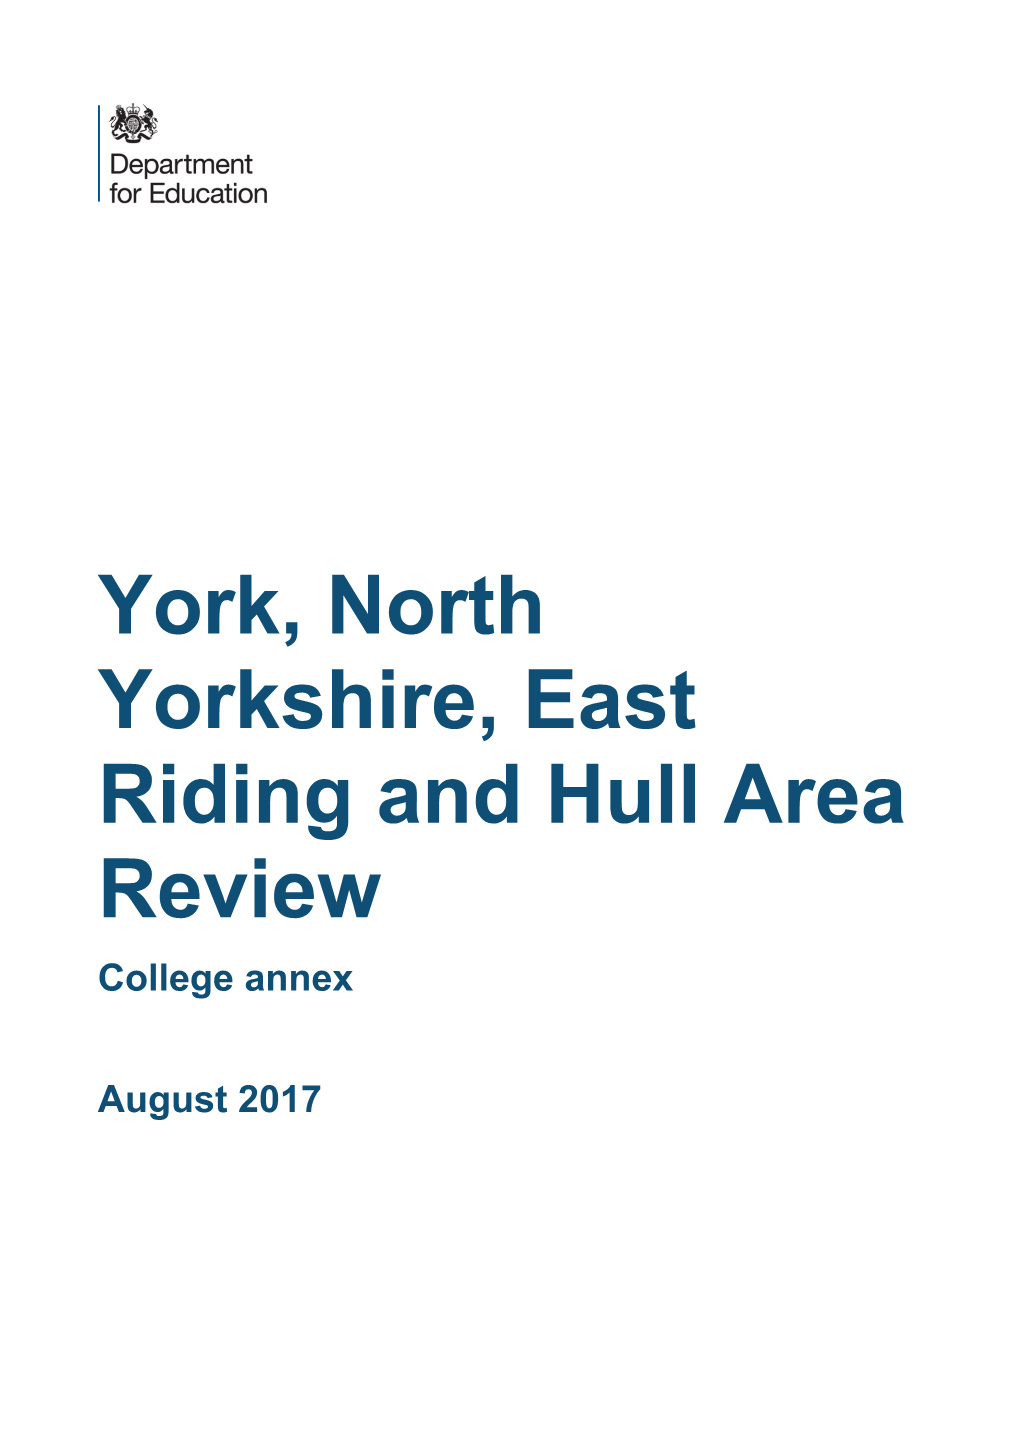 York, North Yorkshire, East Riding and Hull Area Review College Annex